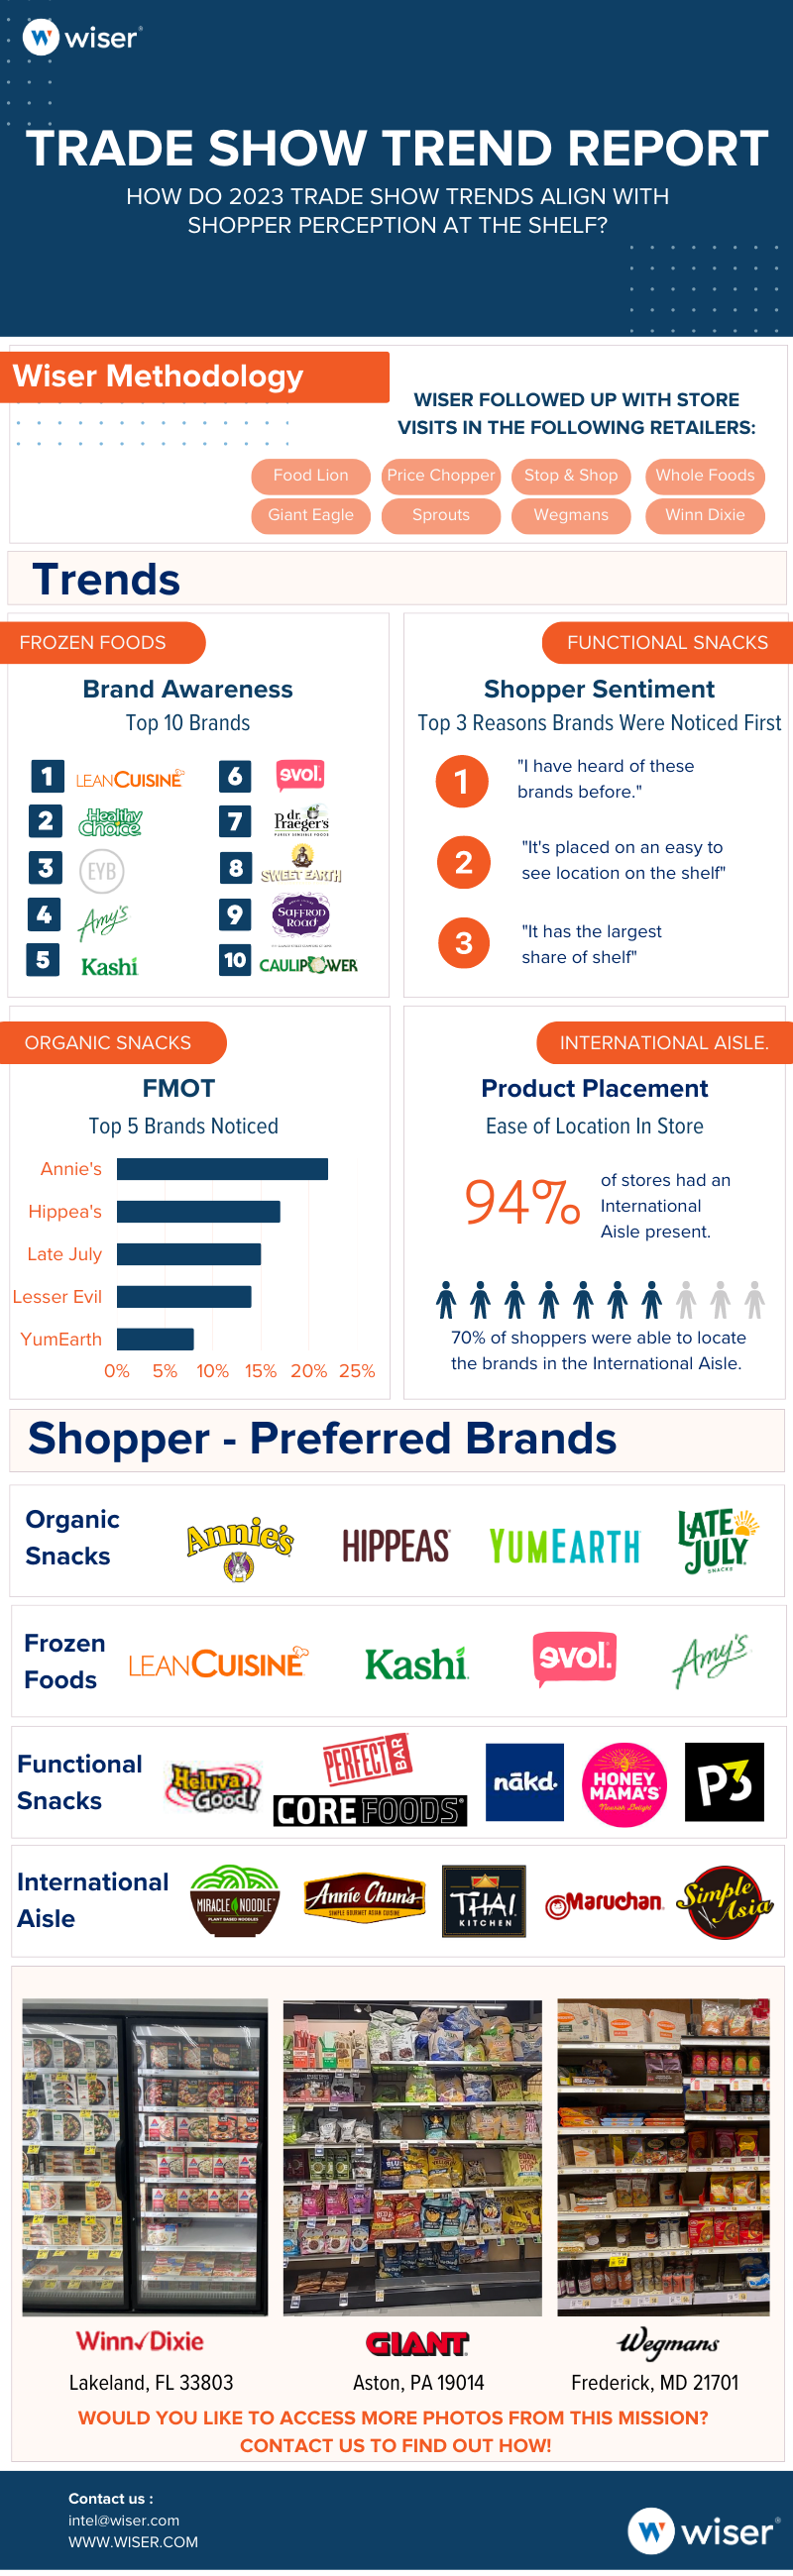 [Infographic] Trade Show Trend Report